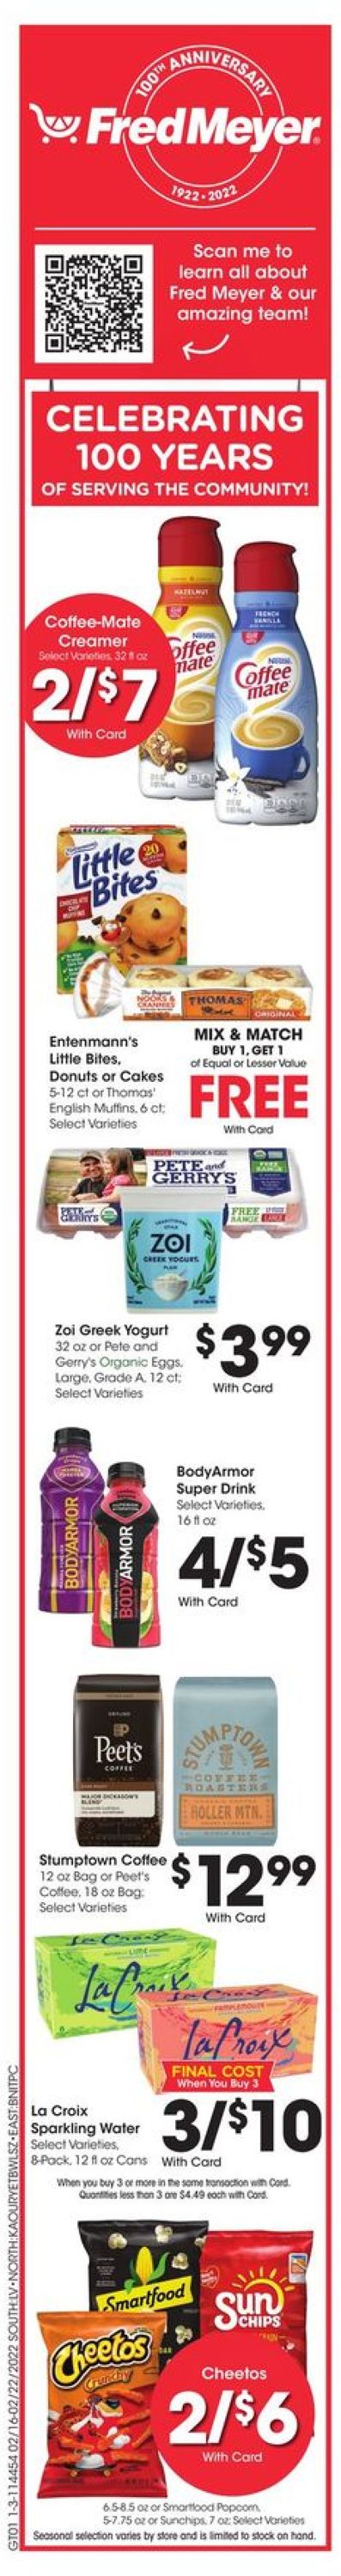 Fred Meyer Weekly Ad Circular - valid 02/16-02/22/2022 (Page 4)